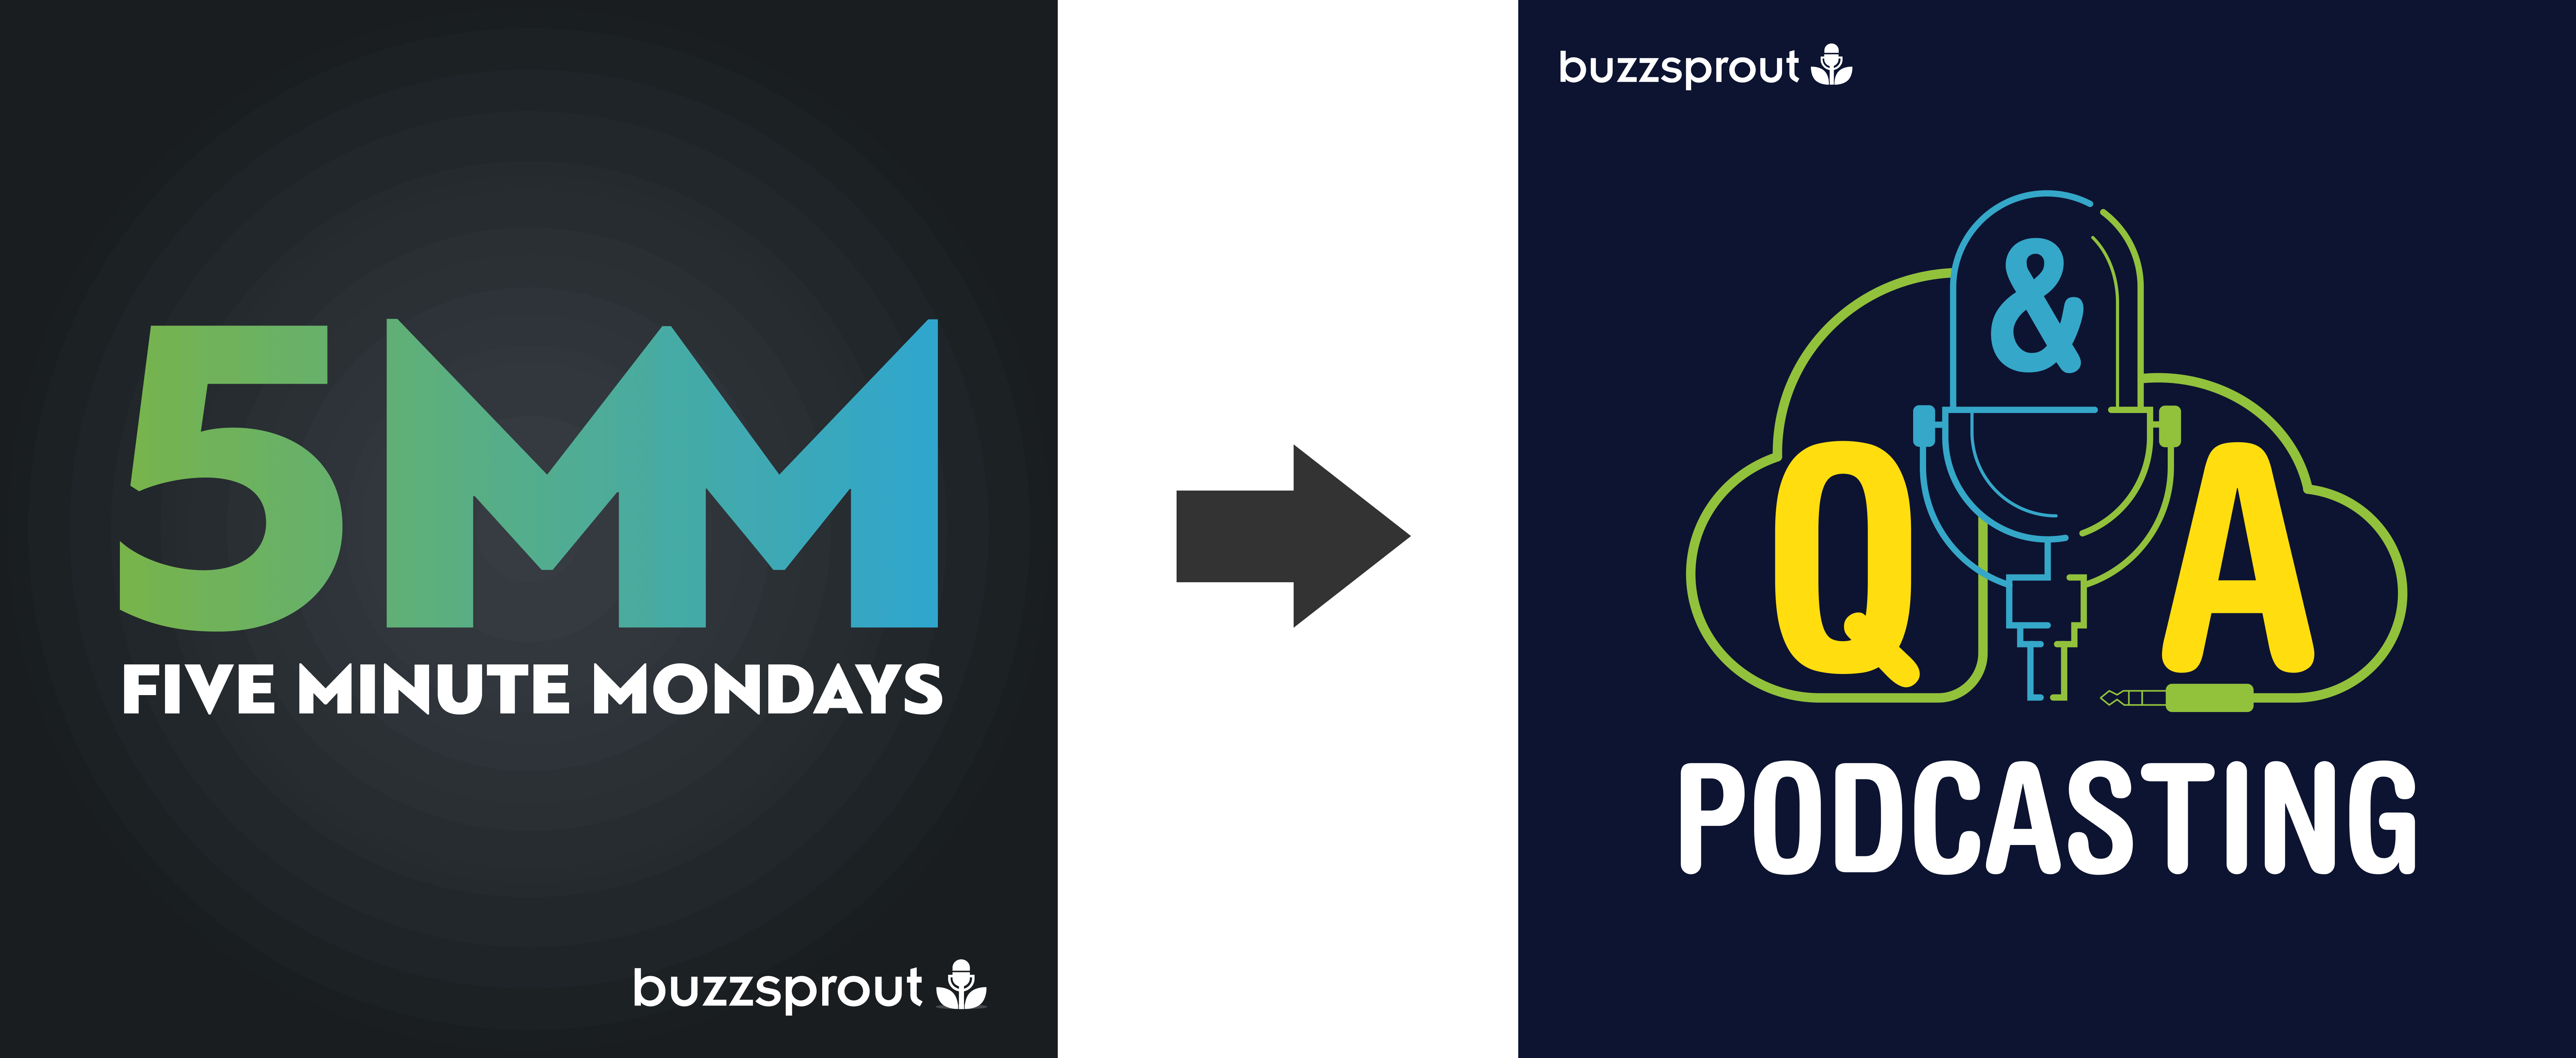 5 Minute Mondays covert art with an arrow pointing to Podcasting Q&A artwork